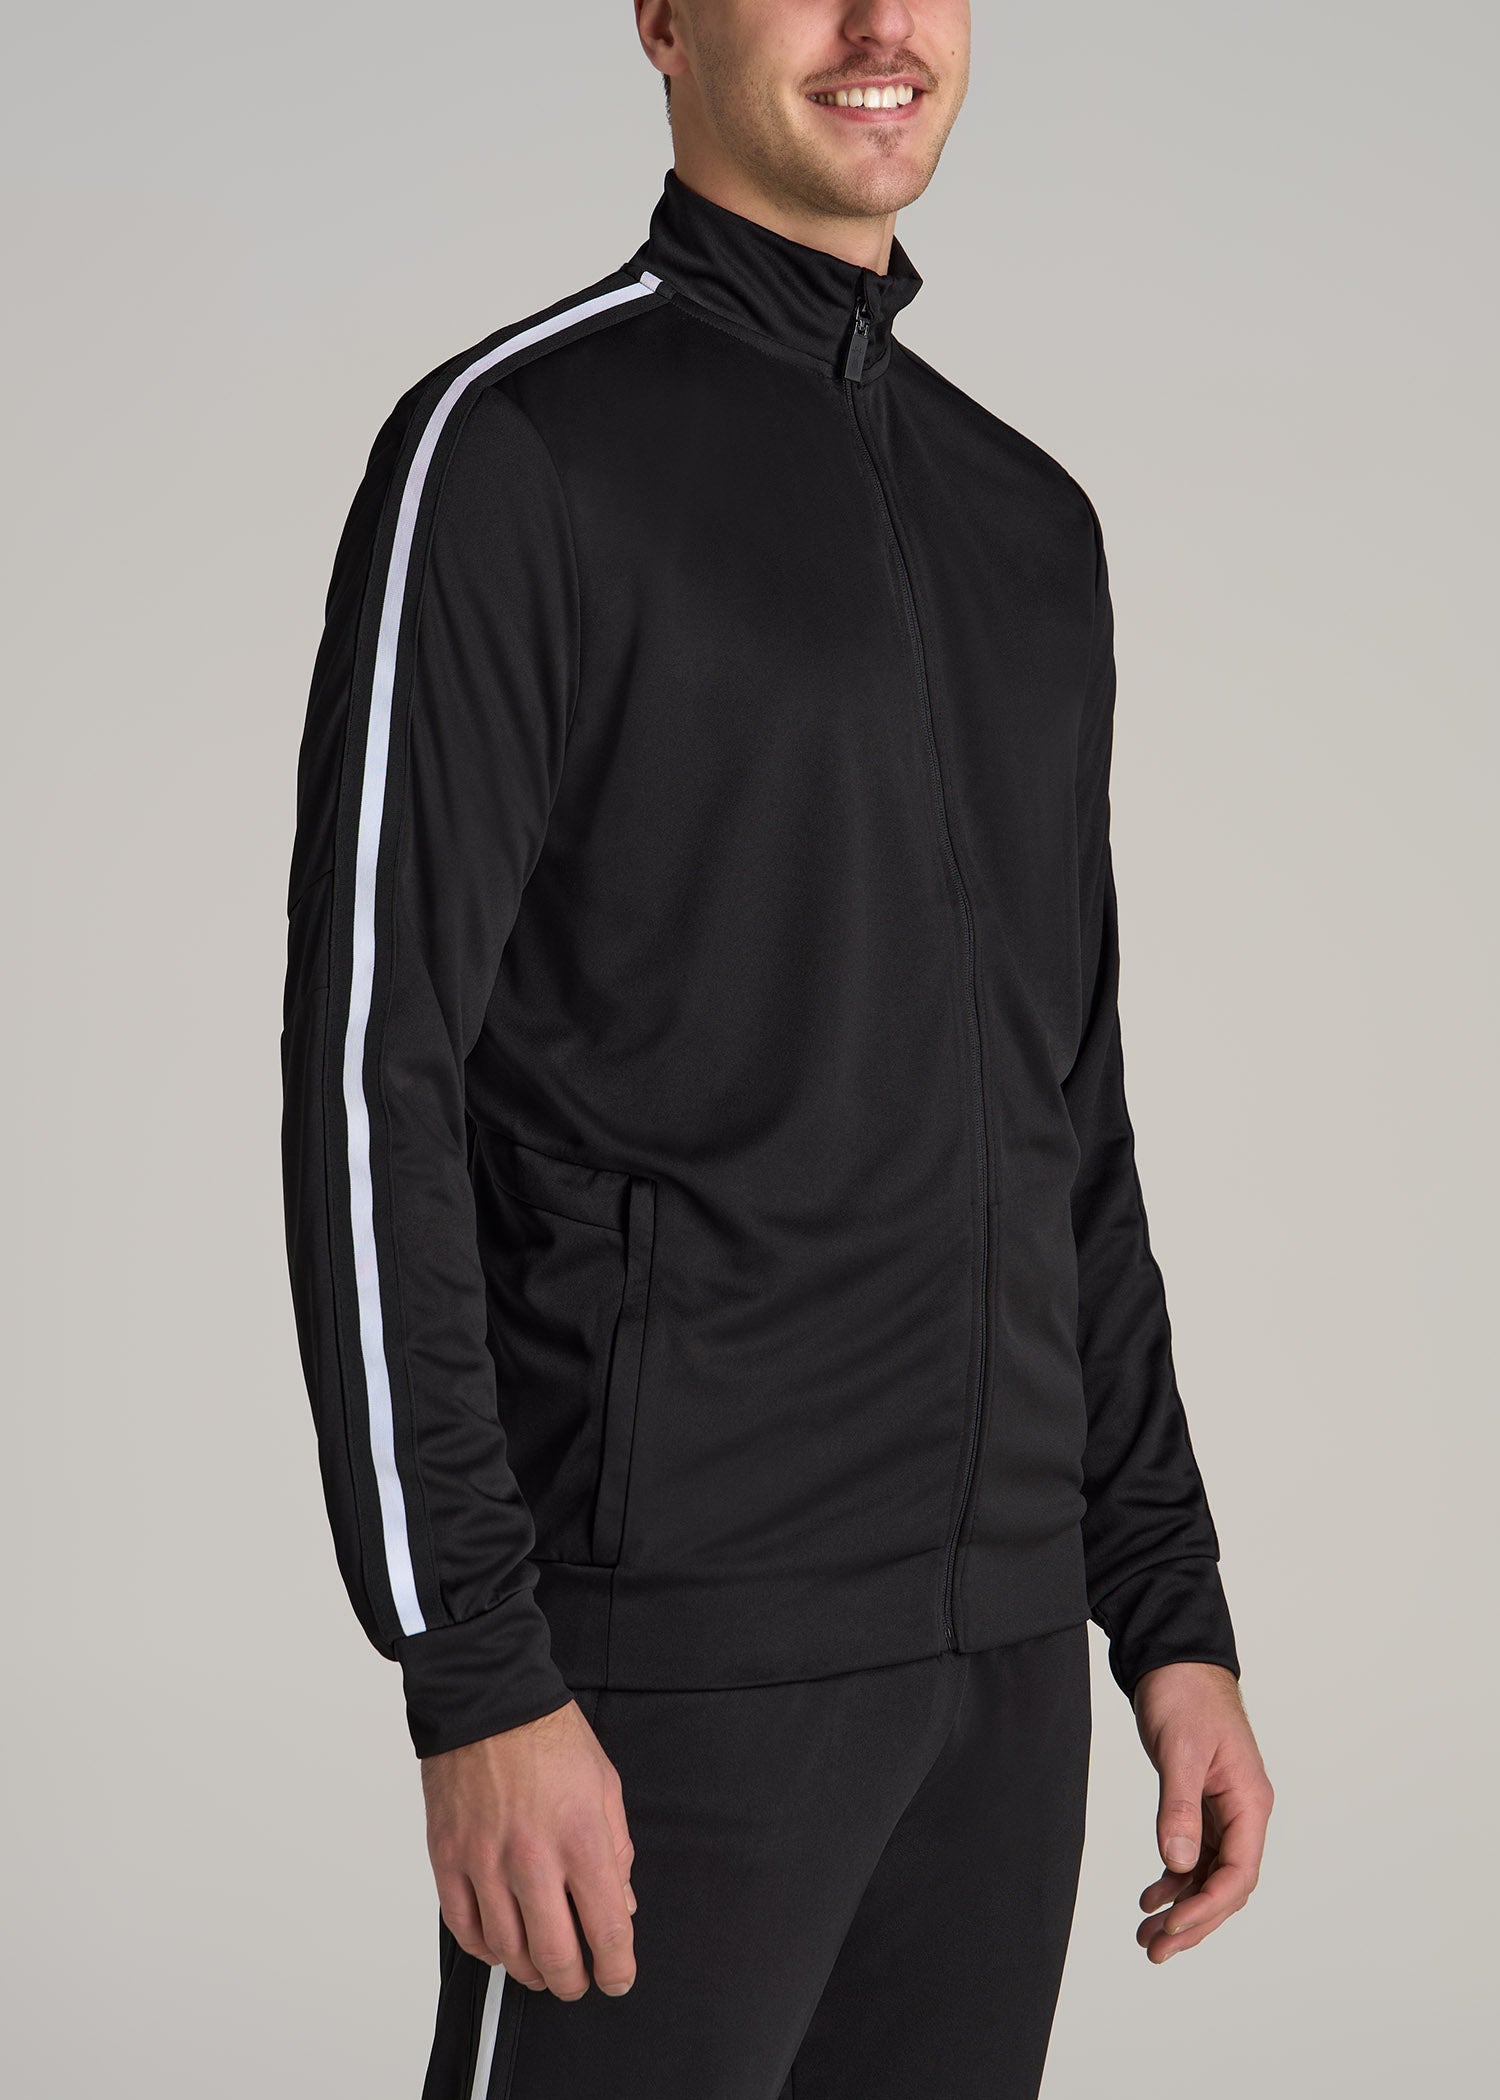 Tall Men's Athletic Black Jacket With White Stripes | American Tall